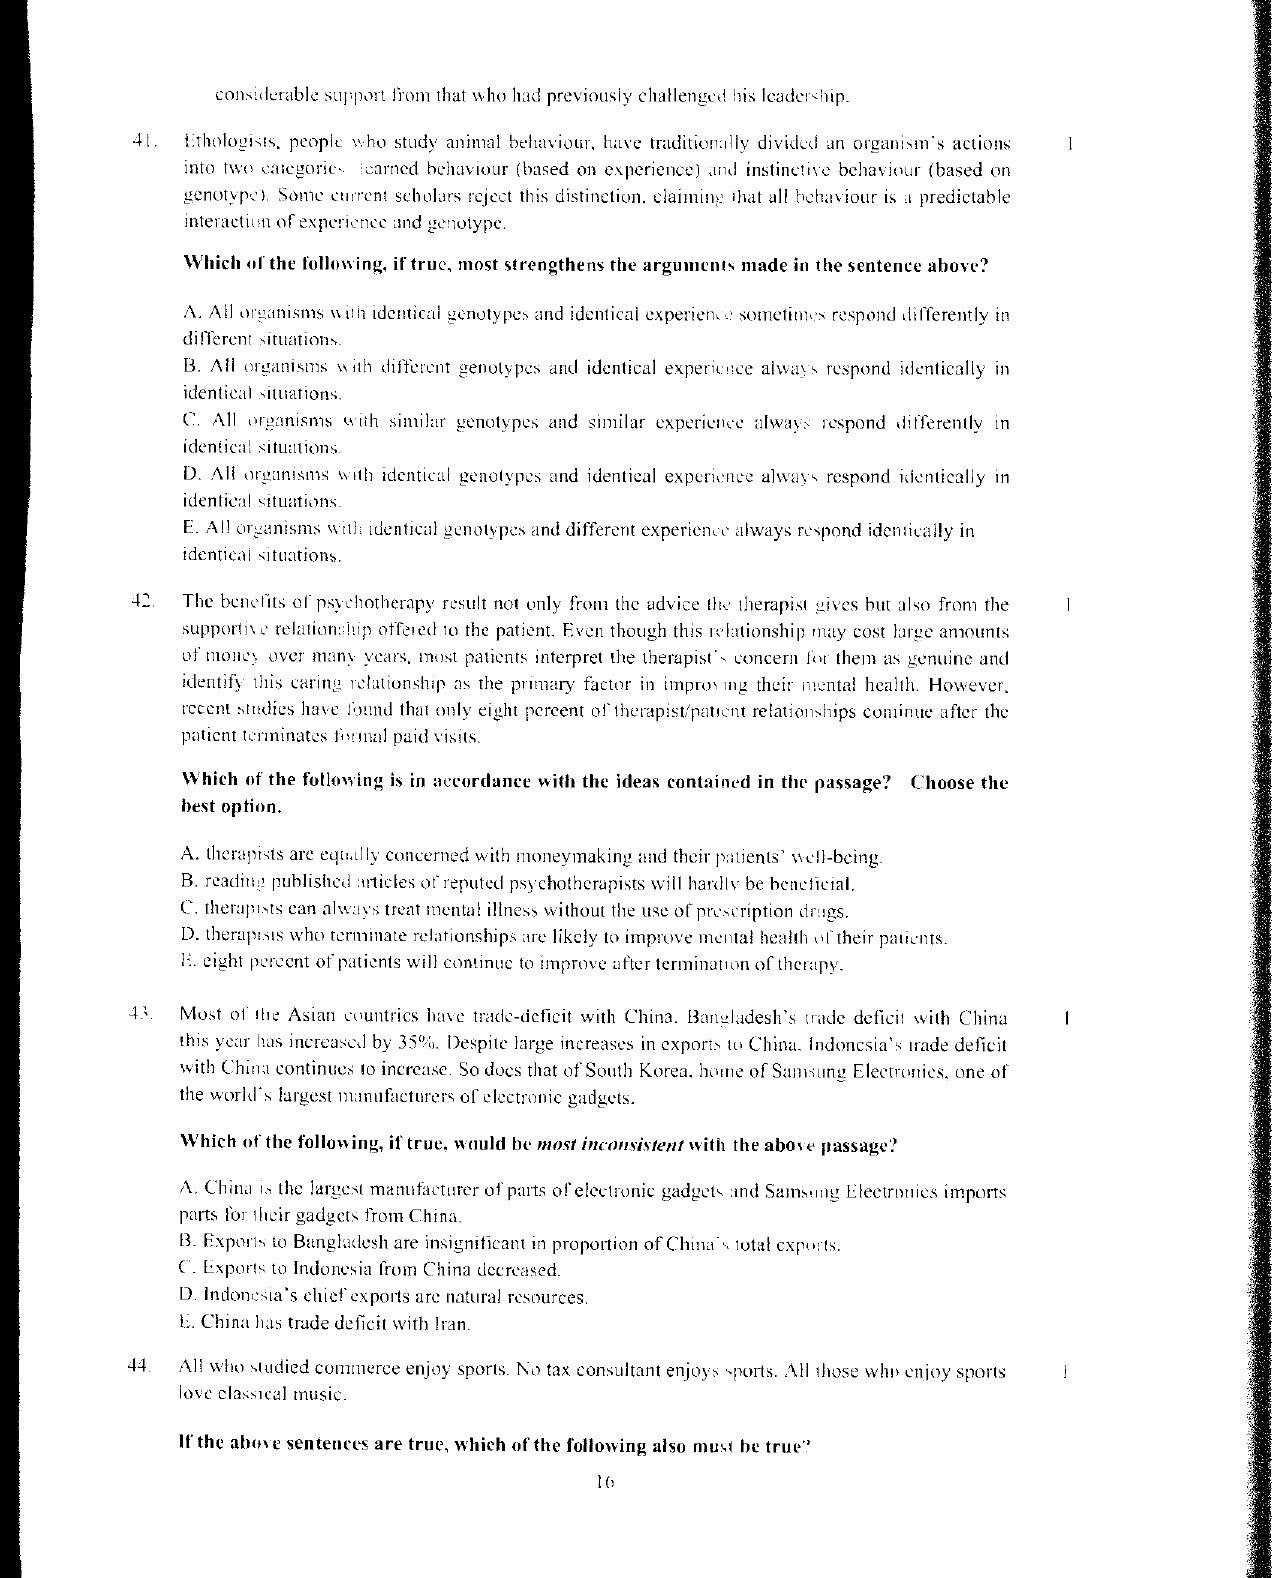 XAT 2012 Question Papers - Page 17